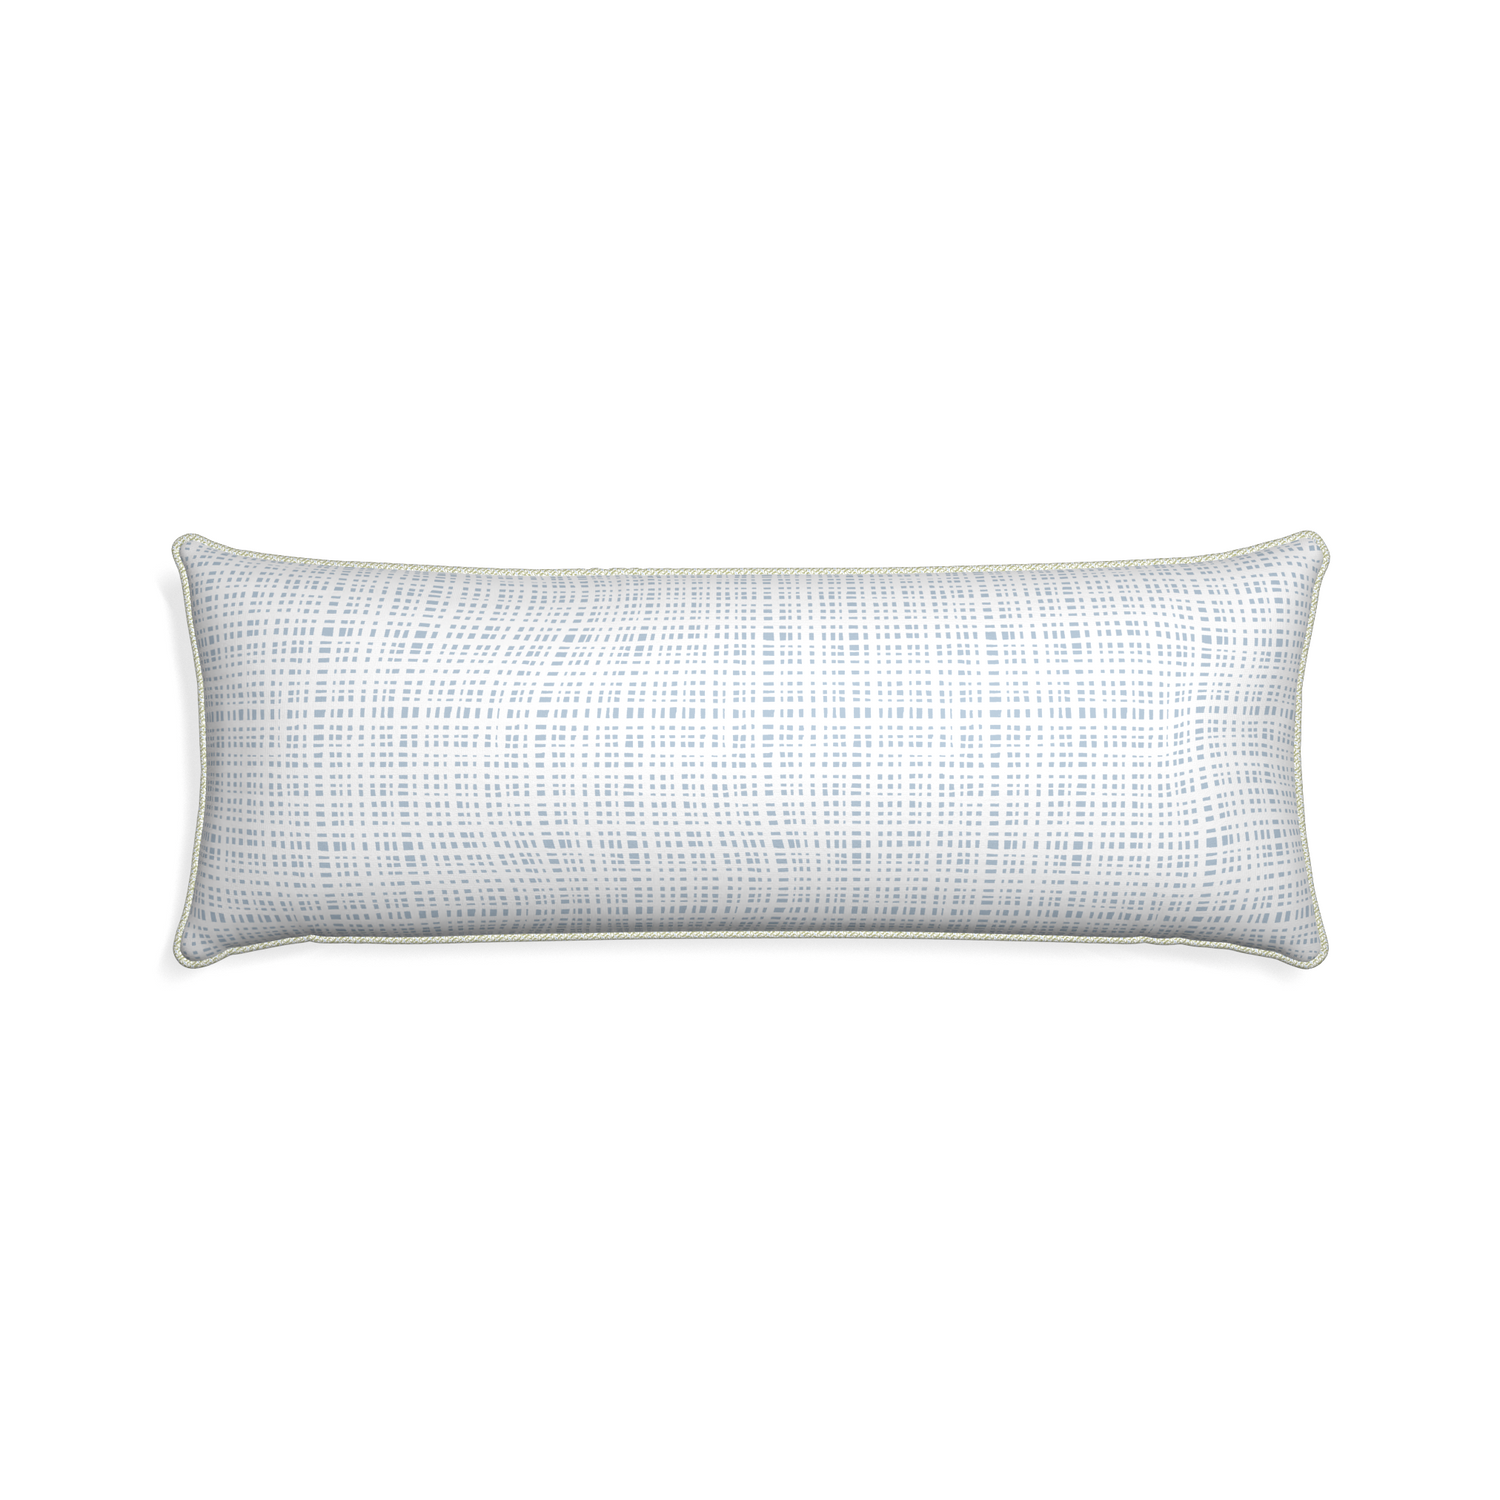 Xl-lumbar ginger custom plaid sky bluepillow with l piping on white background